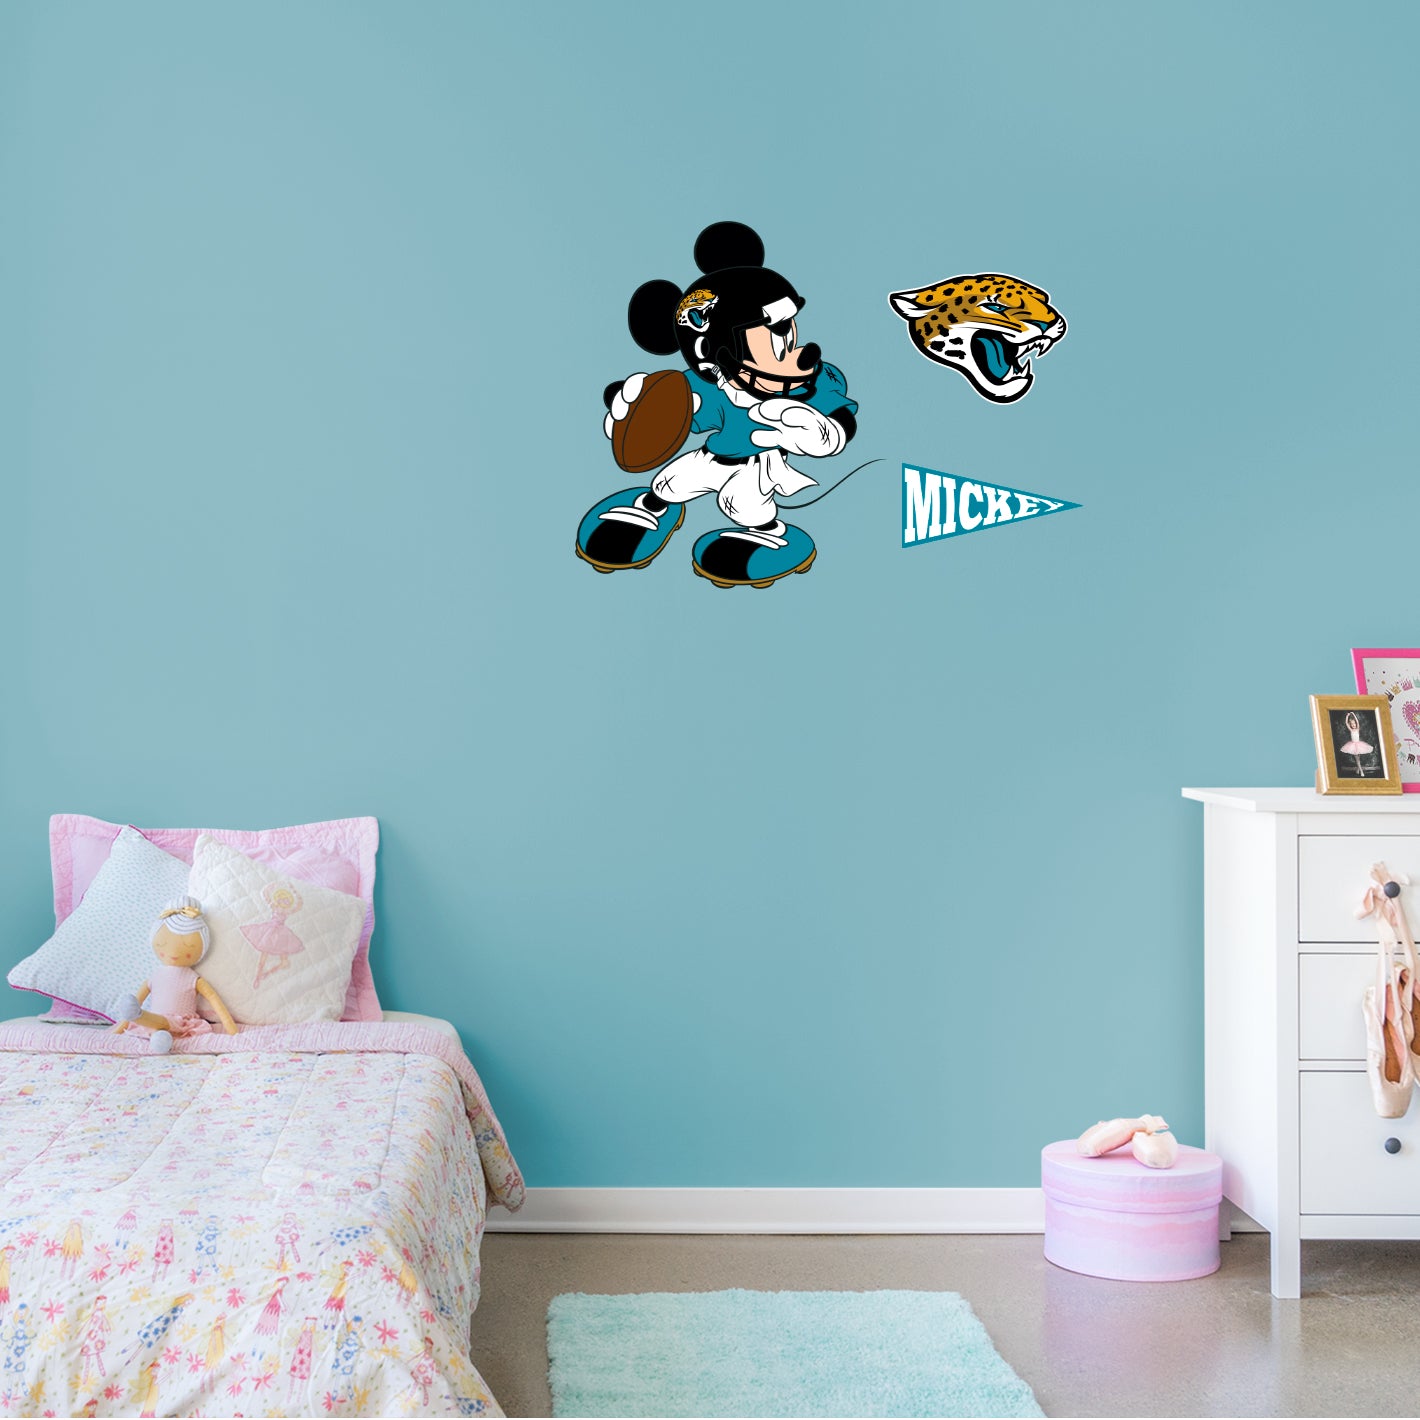 Jacksonville Jaguars: Mickey Mouse 2021        - Officially Licensed NFL Removable     Adhesive Decal